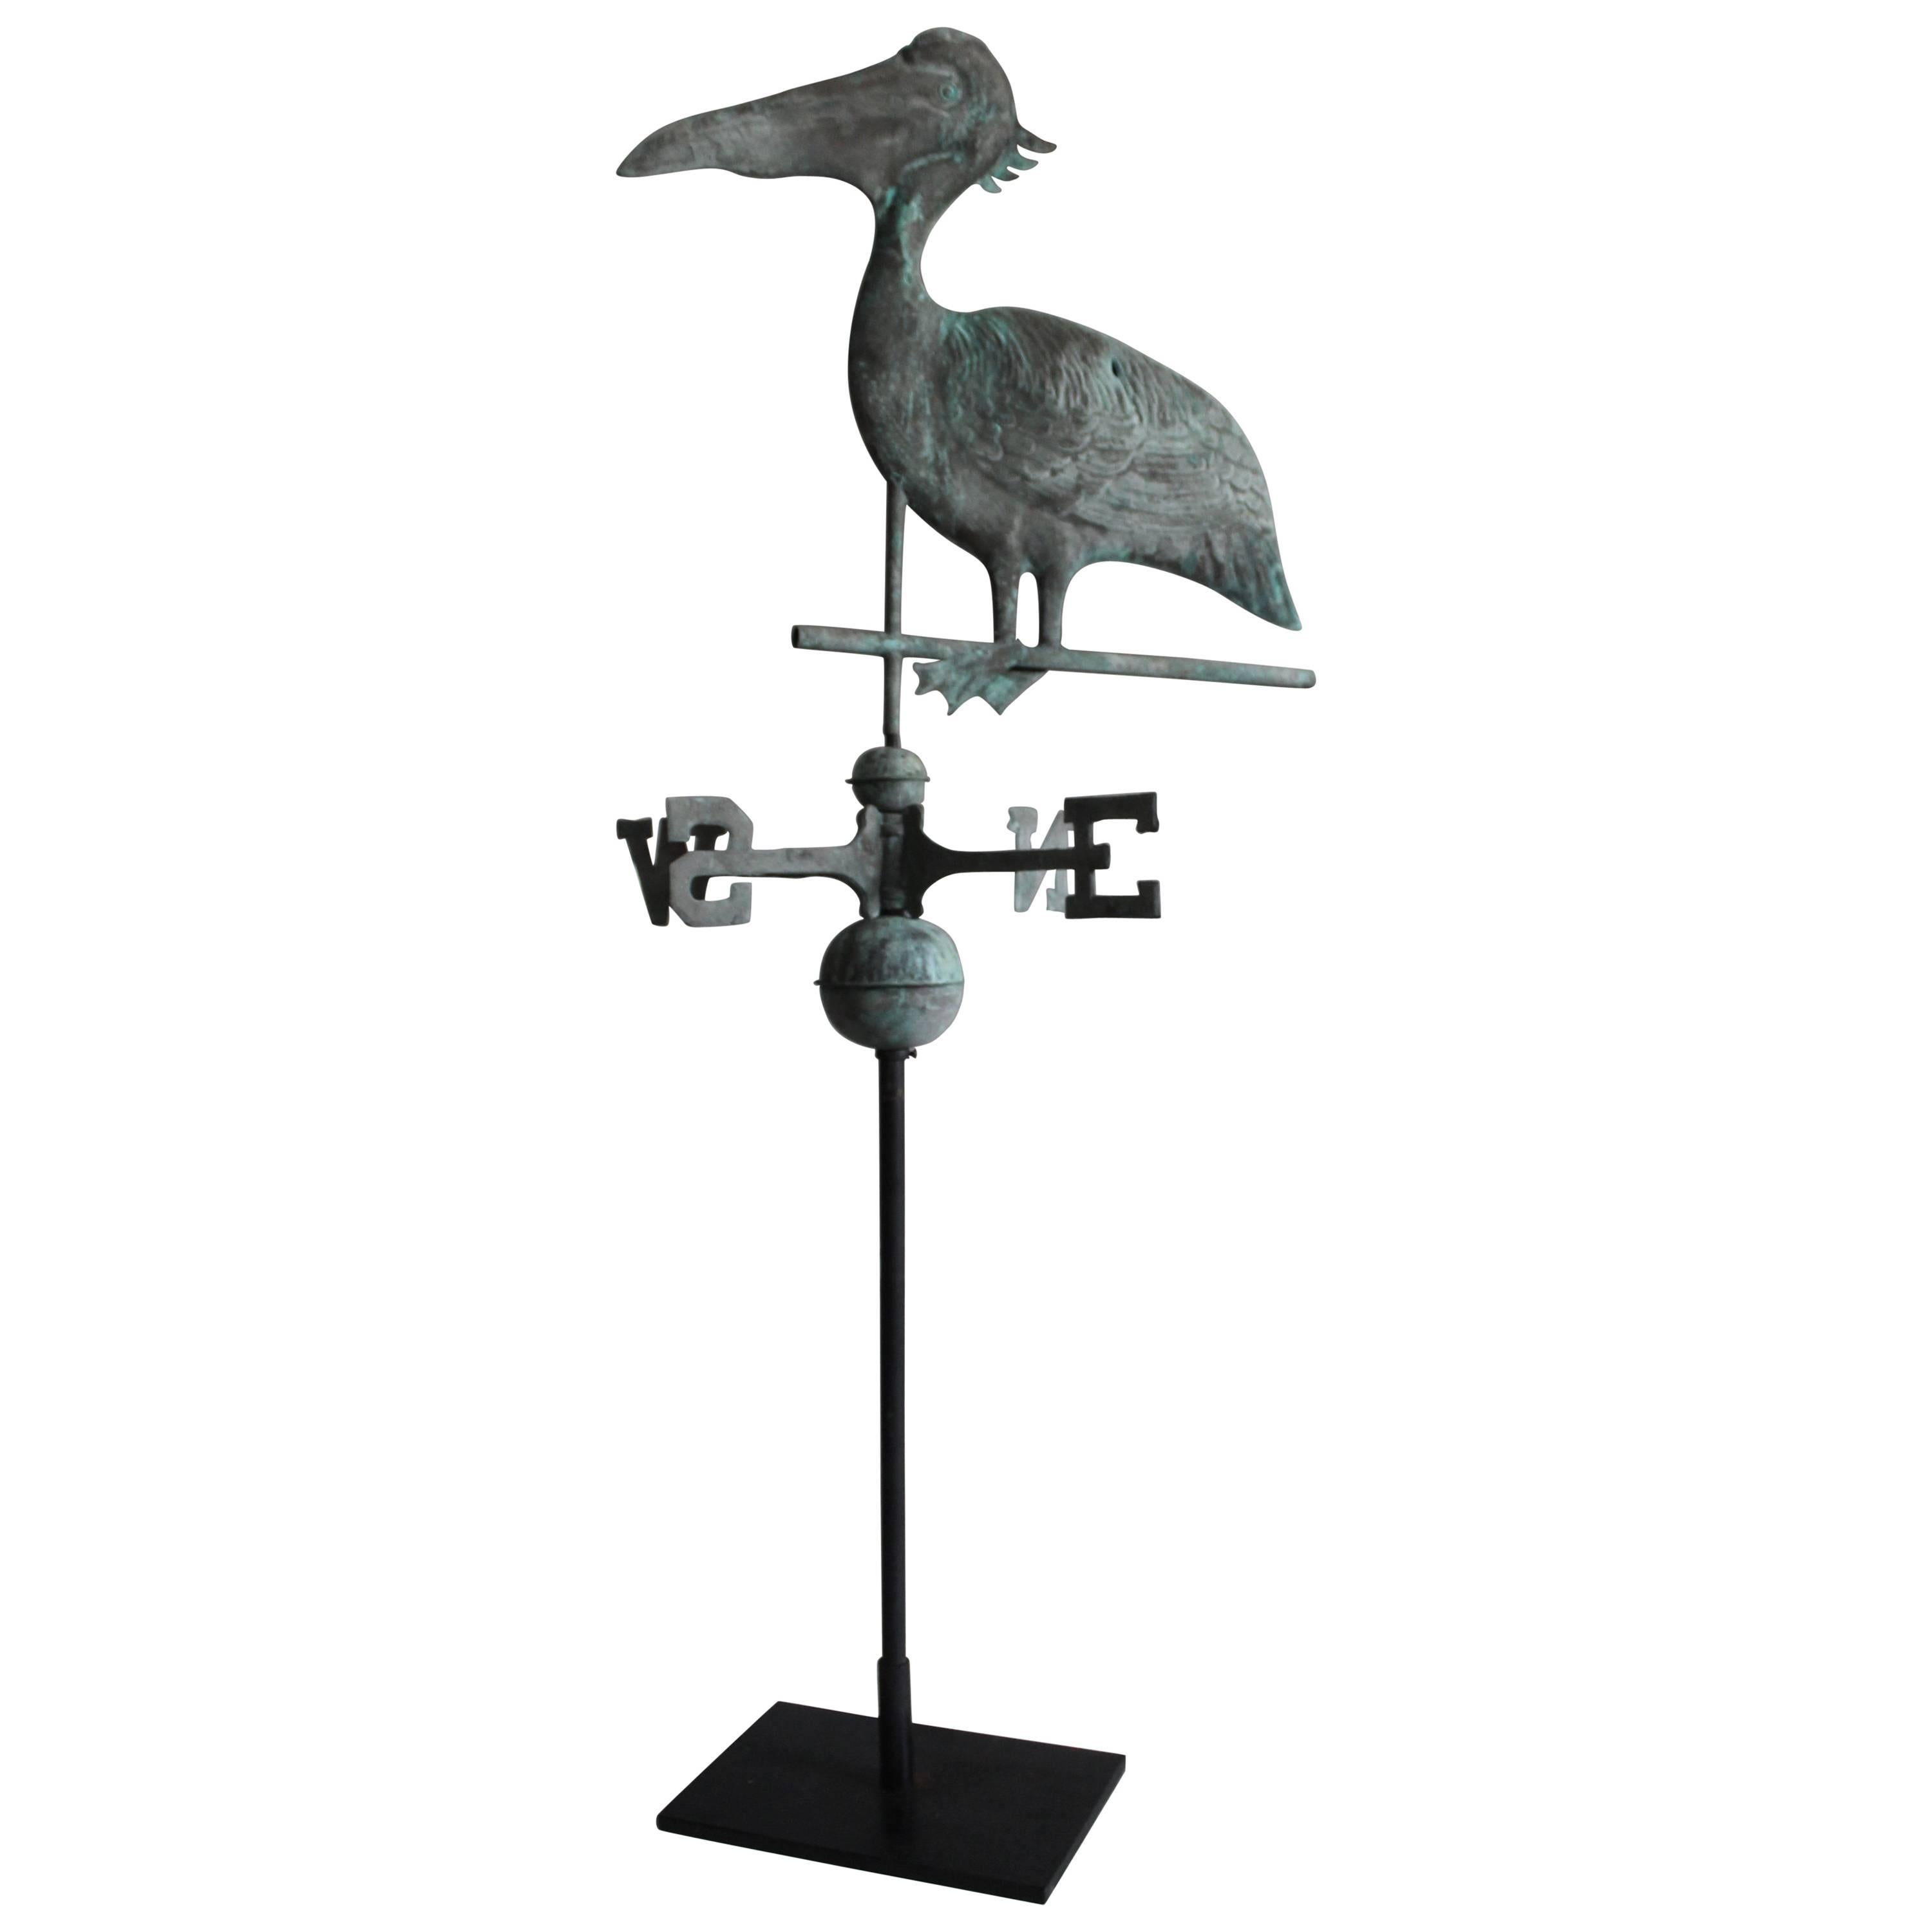 Early 20th Century, Stork Weathervane with Original Directionals on Stand